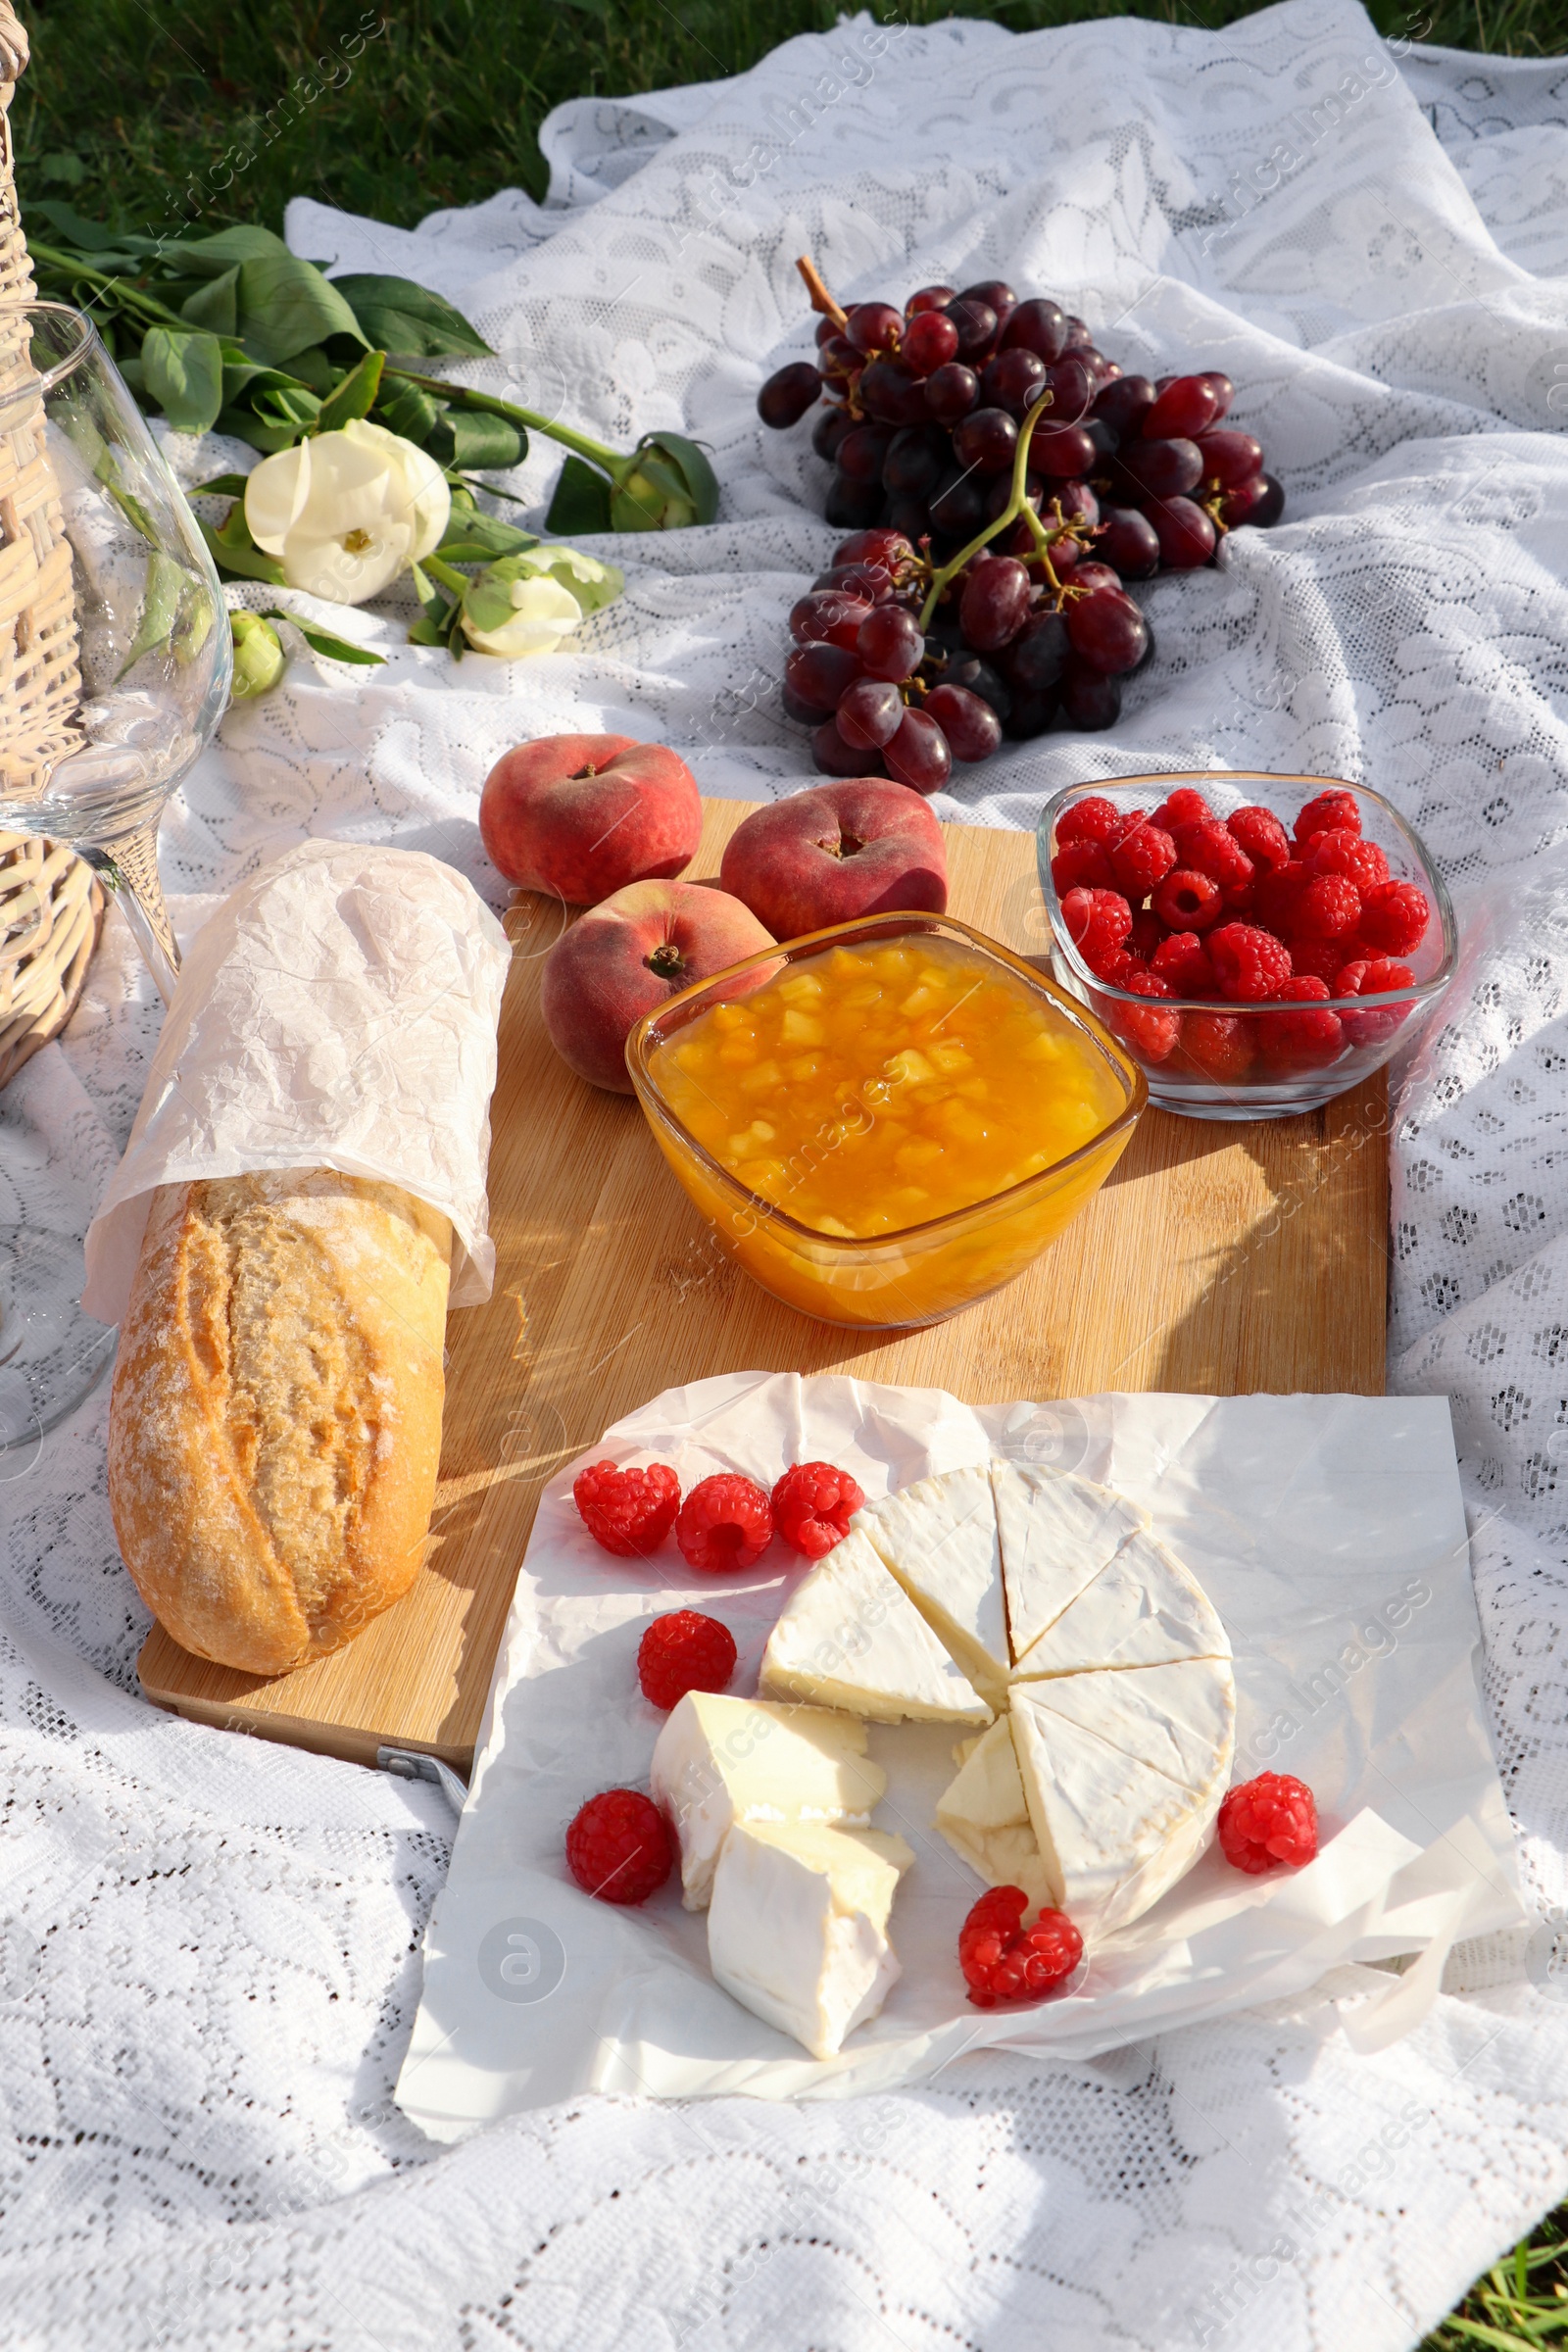 Photo of Picnic blanket with tasty food and flowers outdoors